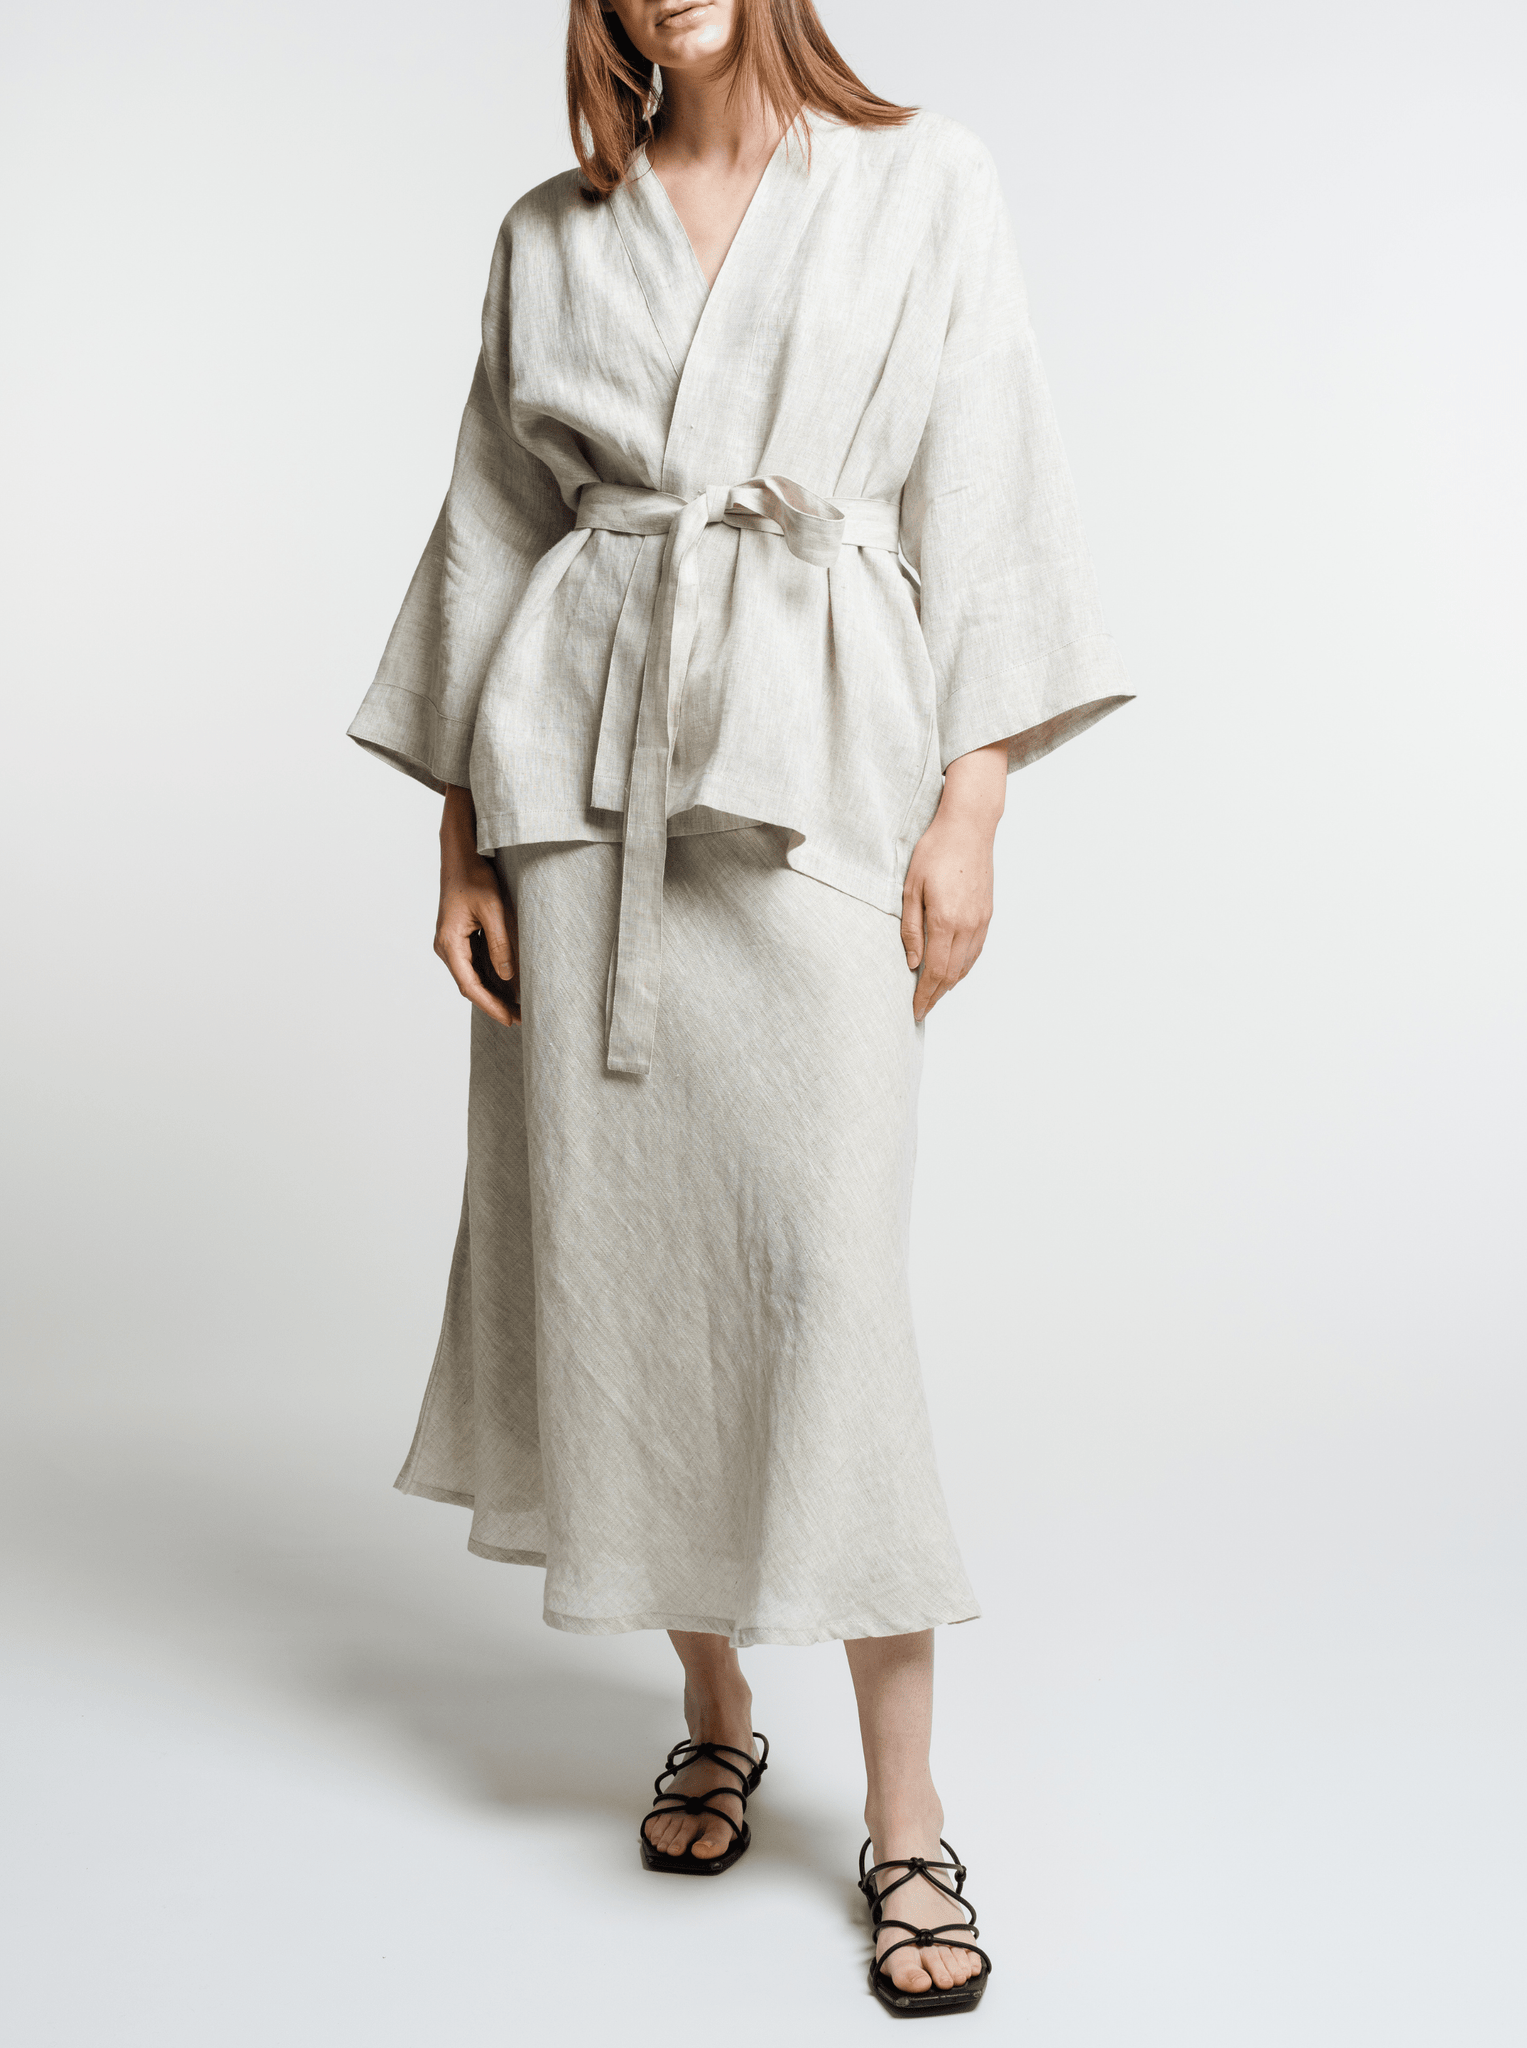 Woman modeling a light-colored organic Linen Wrap Top - Natural with a tie waist and flared sleeves, paired with black strappy sandals.